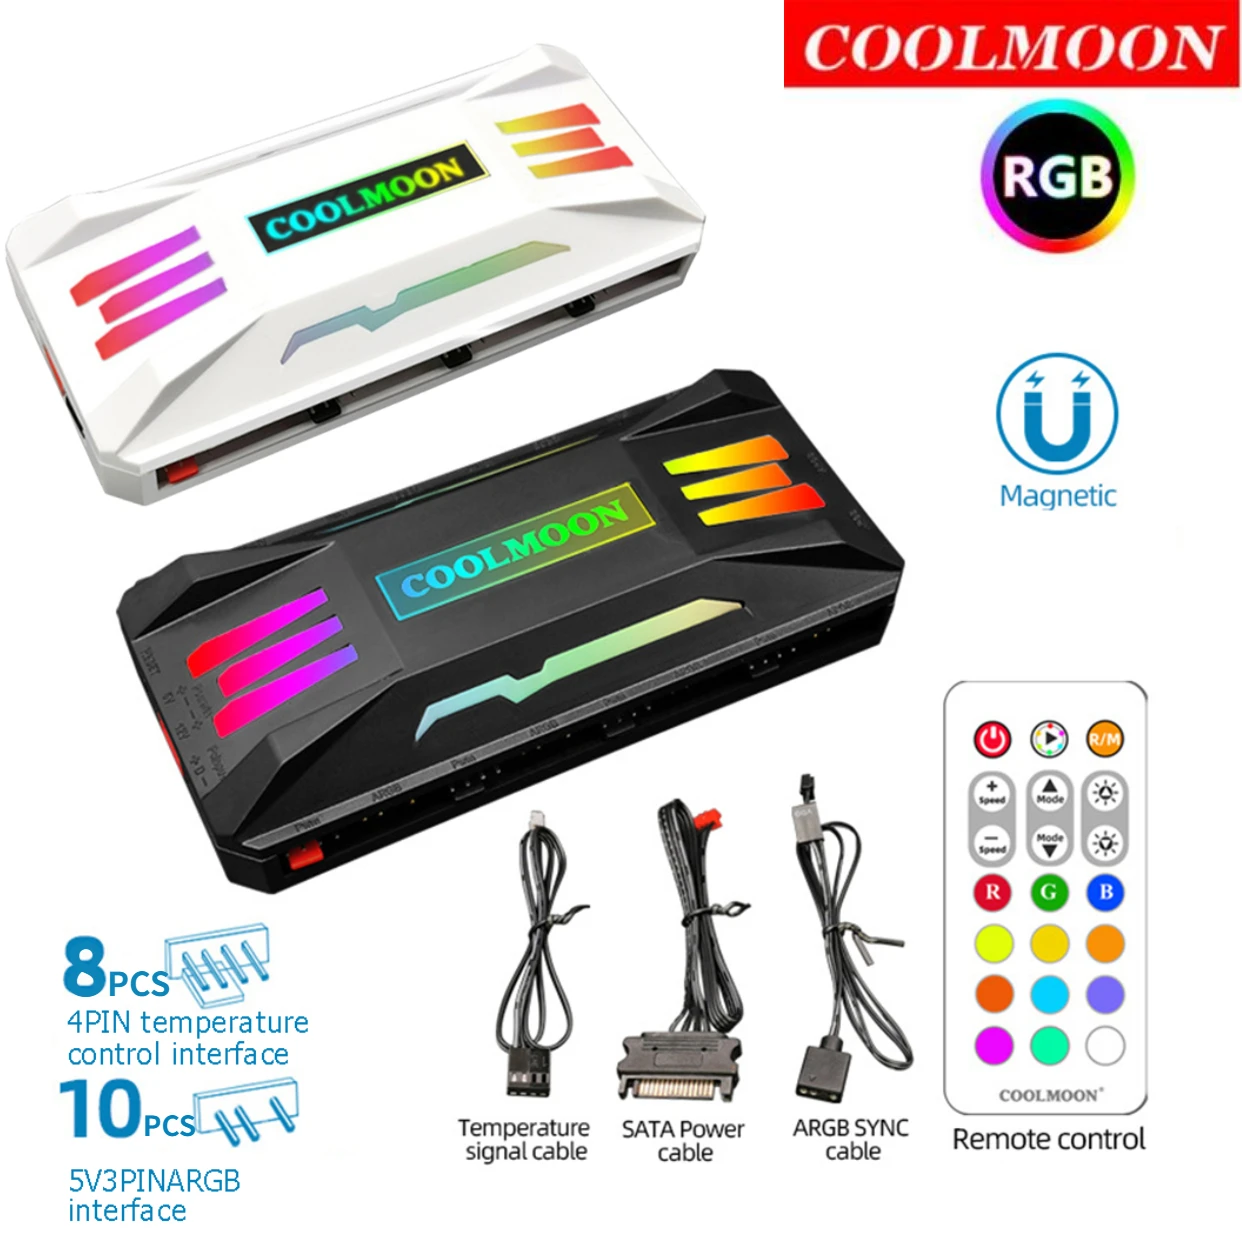 

COOLMOON RGB Controller 4Pin PWM 5V 3Pin ARGB Cooling Fan Smart Intelligent Remote Control for PC Case Chassis Radiator